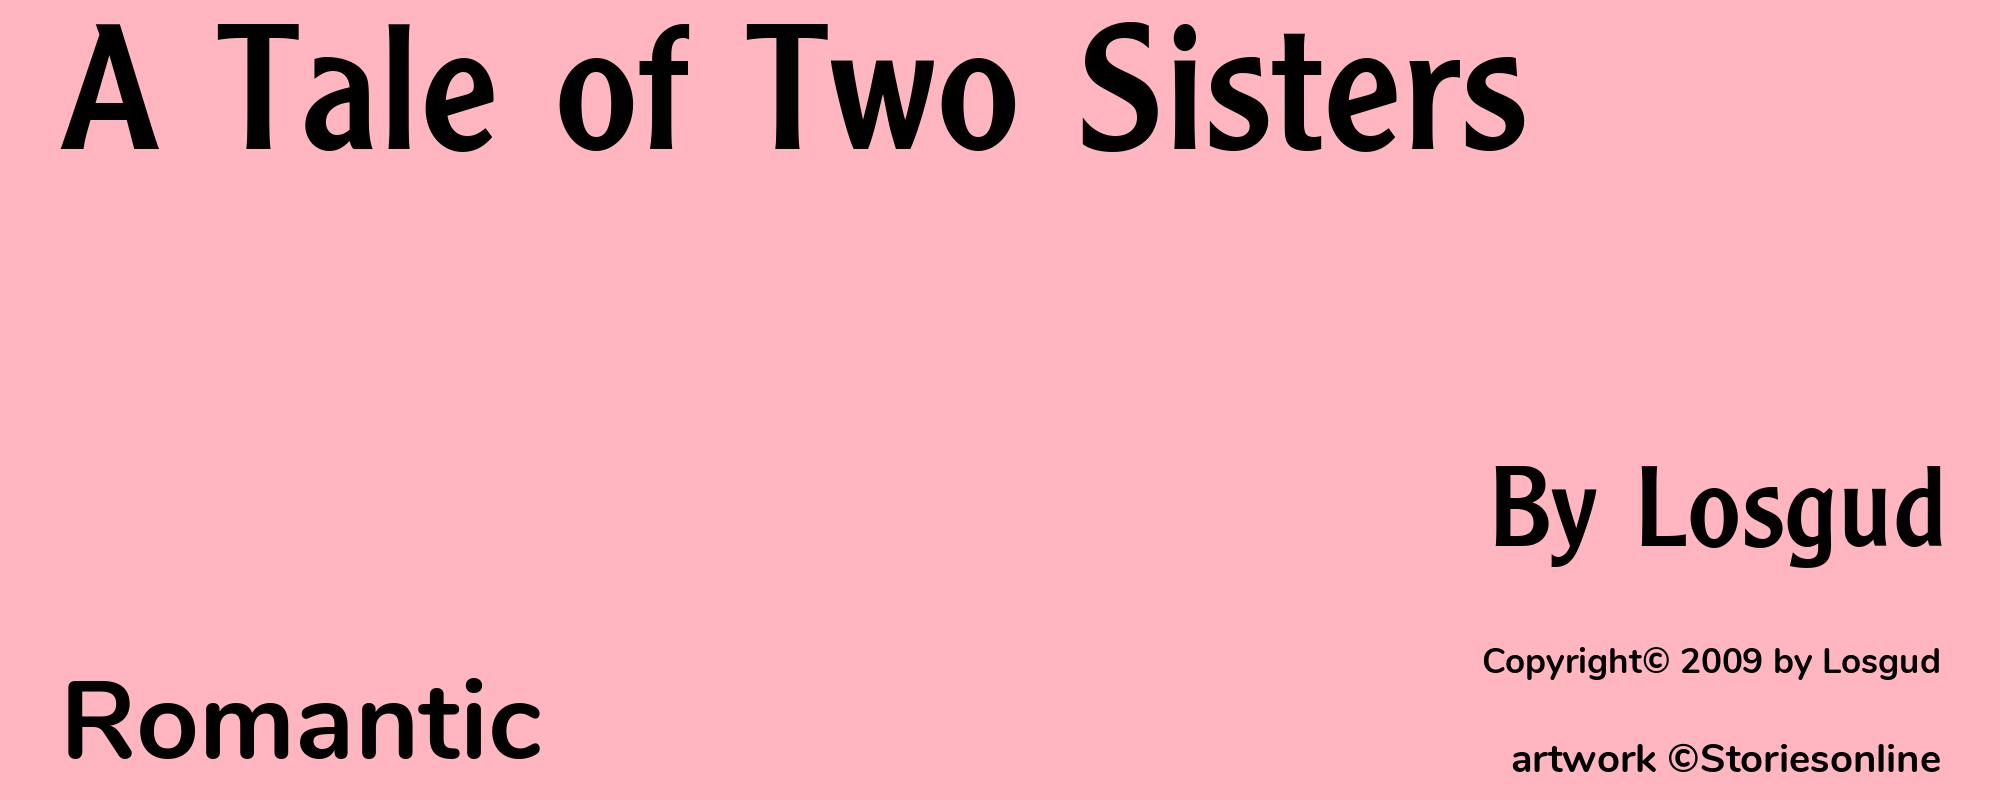 A Tale of Two Sisters - Cover